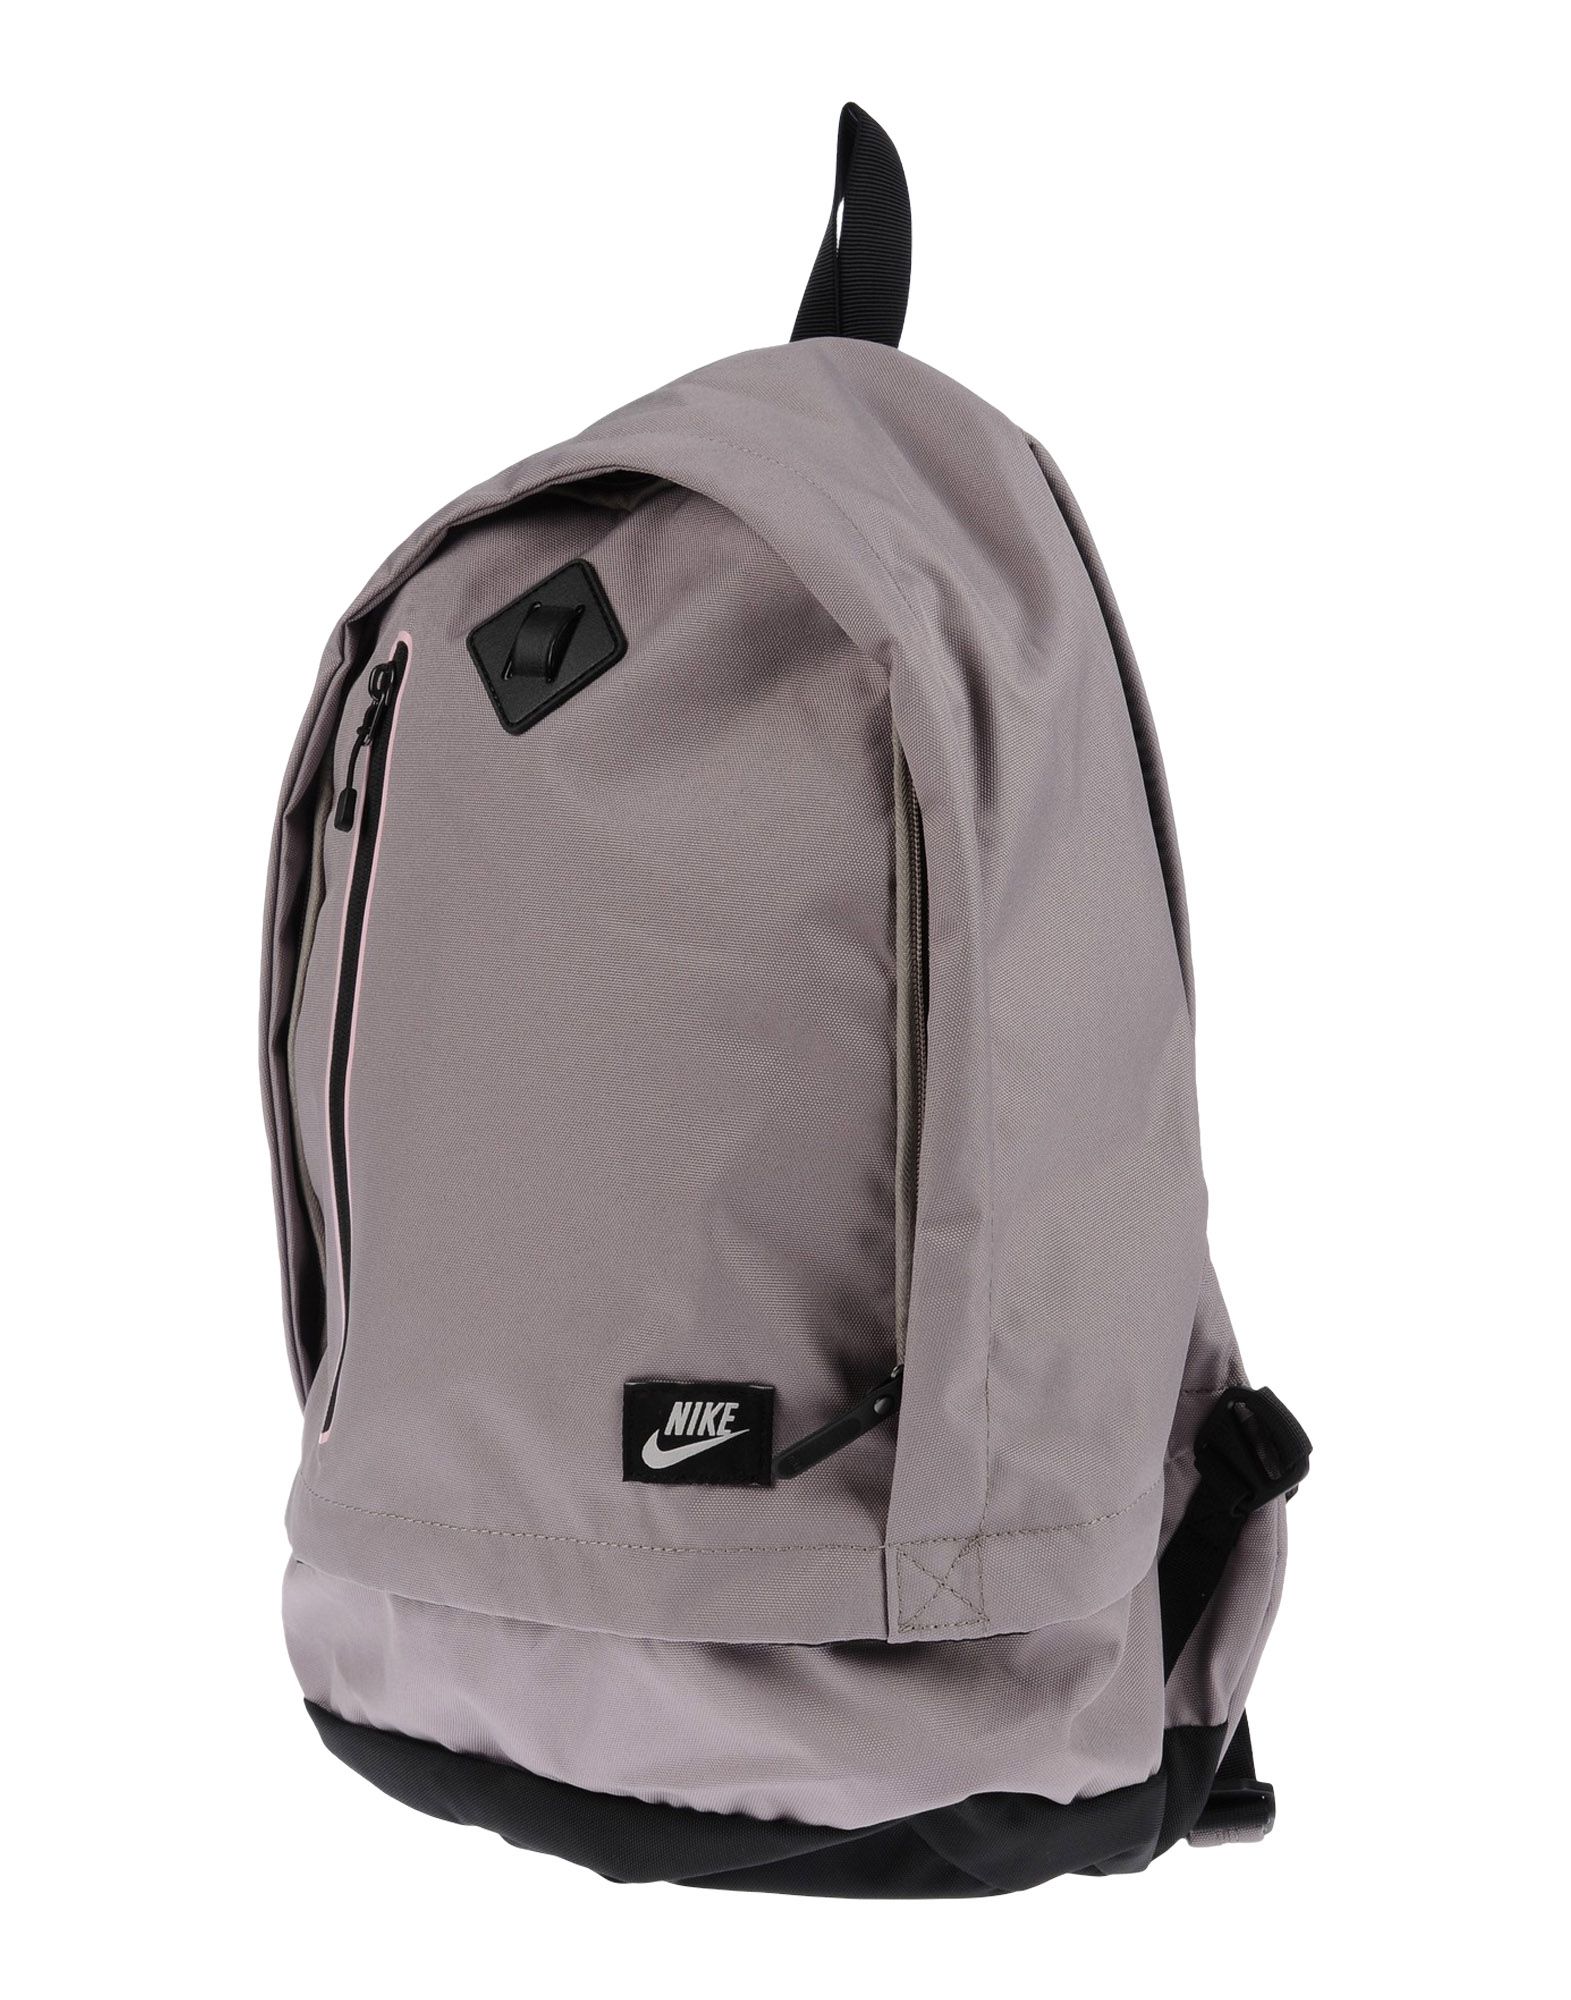 Nike Backpack Fanny Pack in Grey (Gray) for Men - Lyst